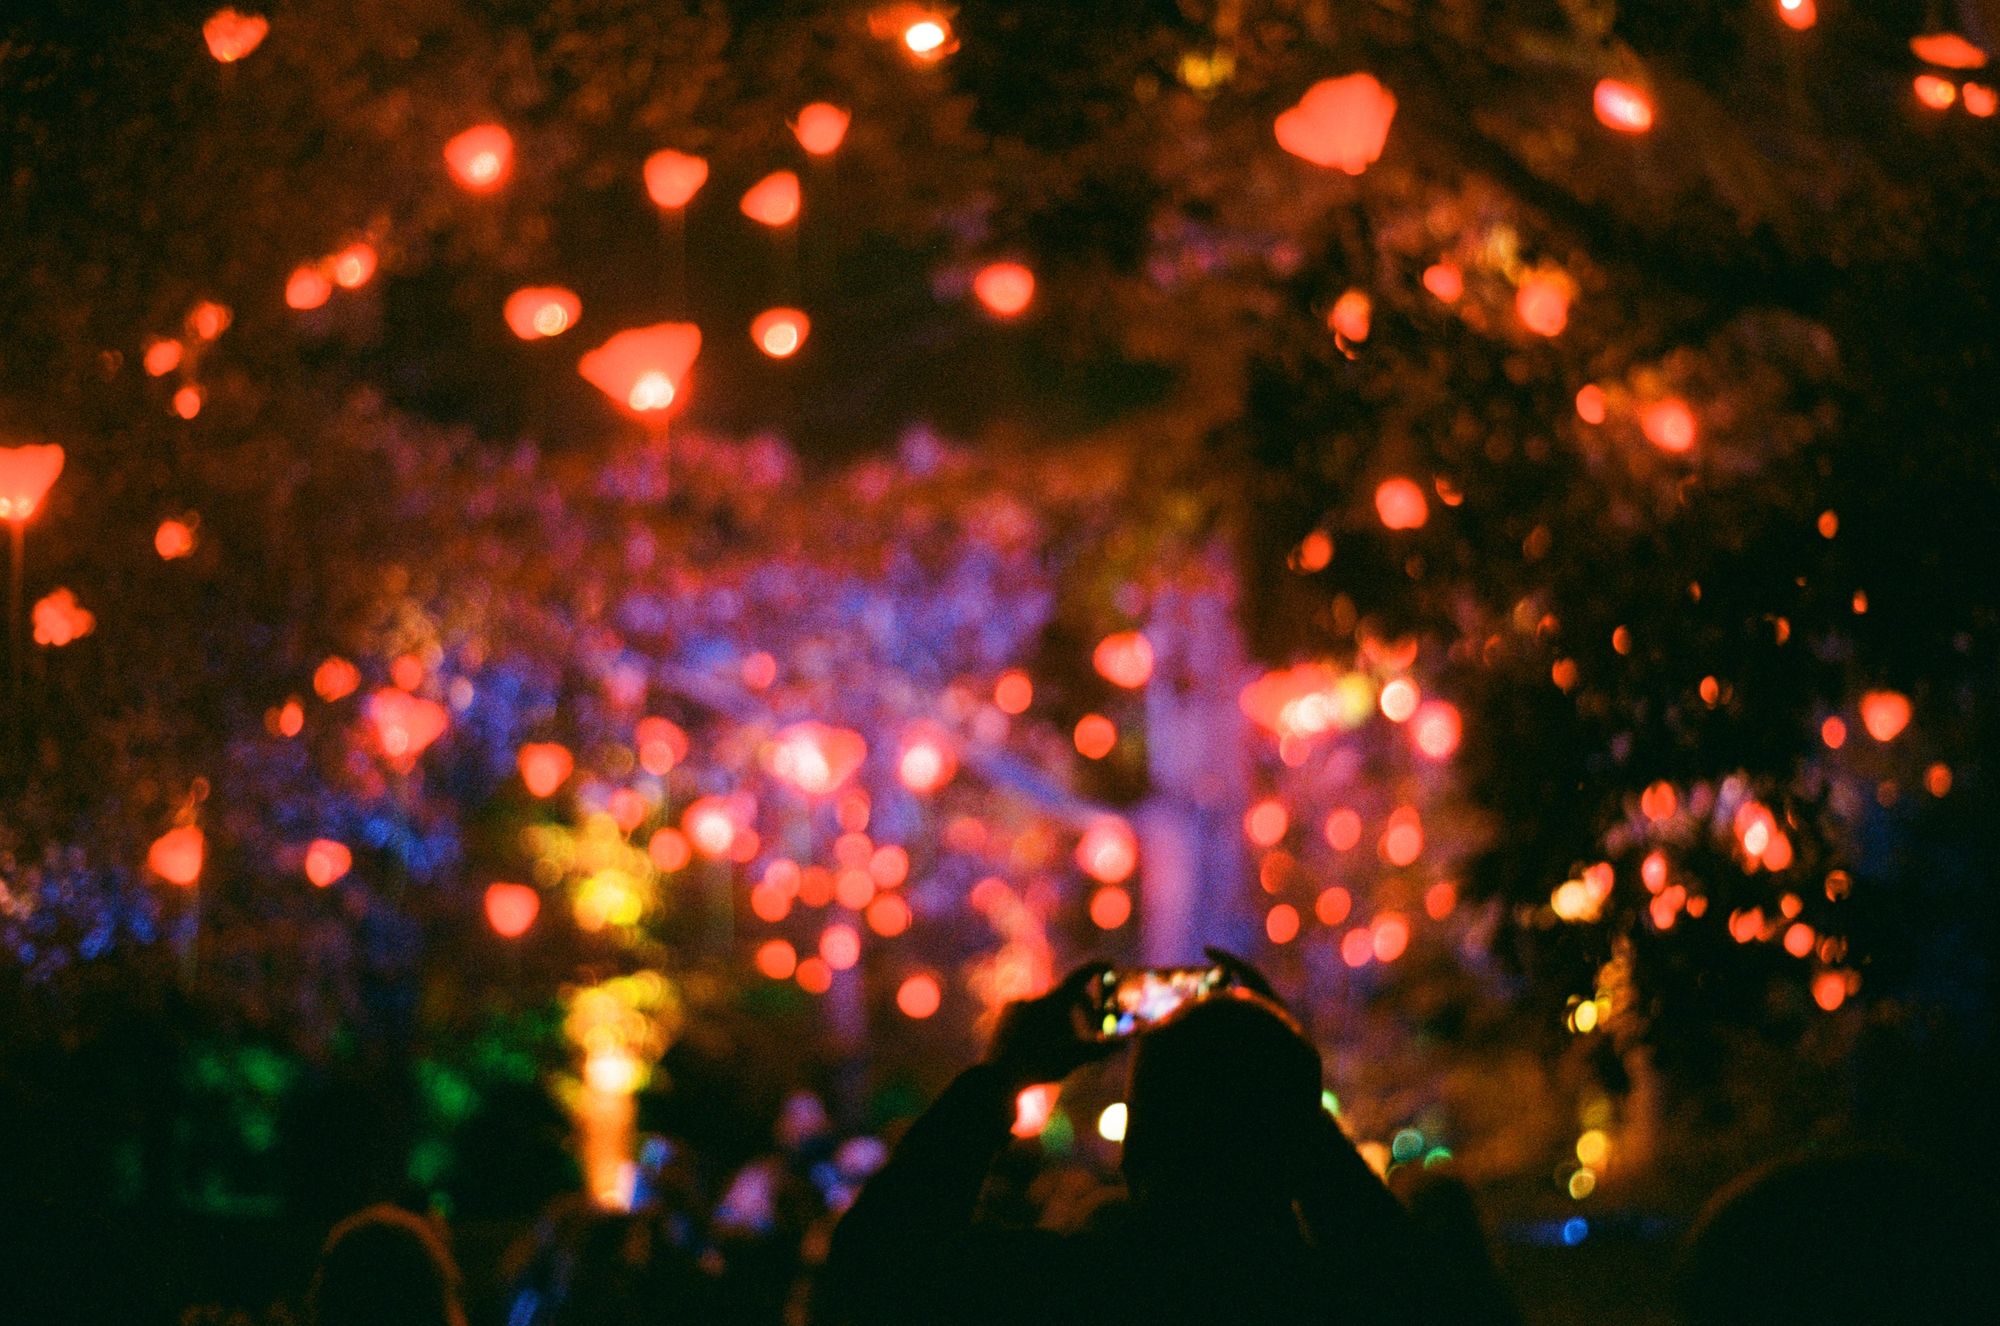 At night under a tree canopy: dozens of little red lights in soft focus hang from the trees, swirling slightly, producing a cacophony of red light apparently suspended in space. In the foreground, a silhouetted figure takes a photo on their phone.